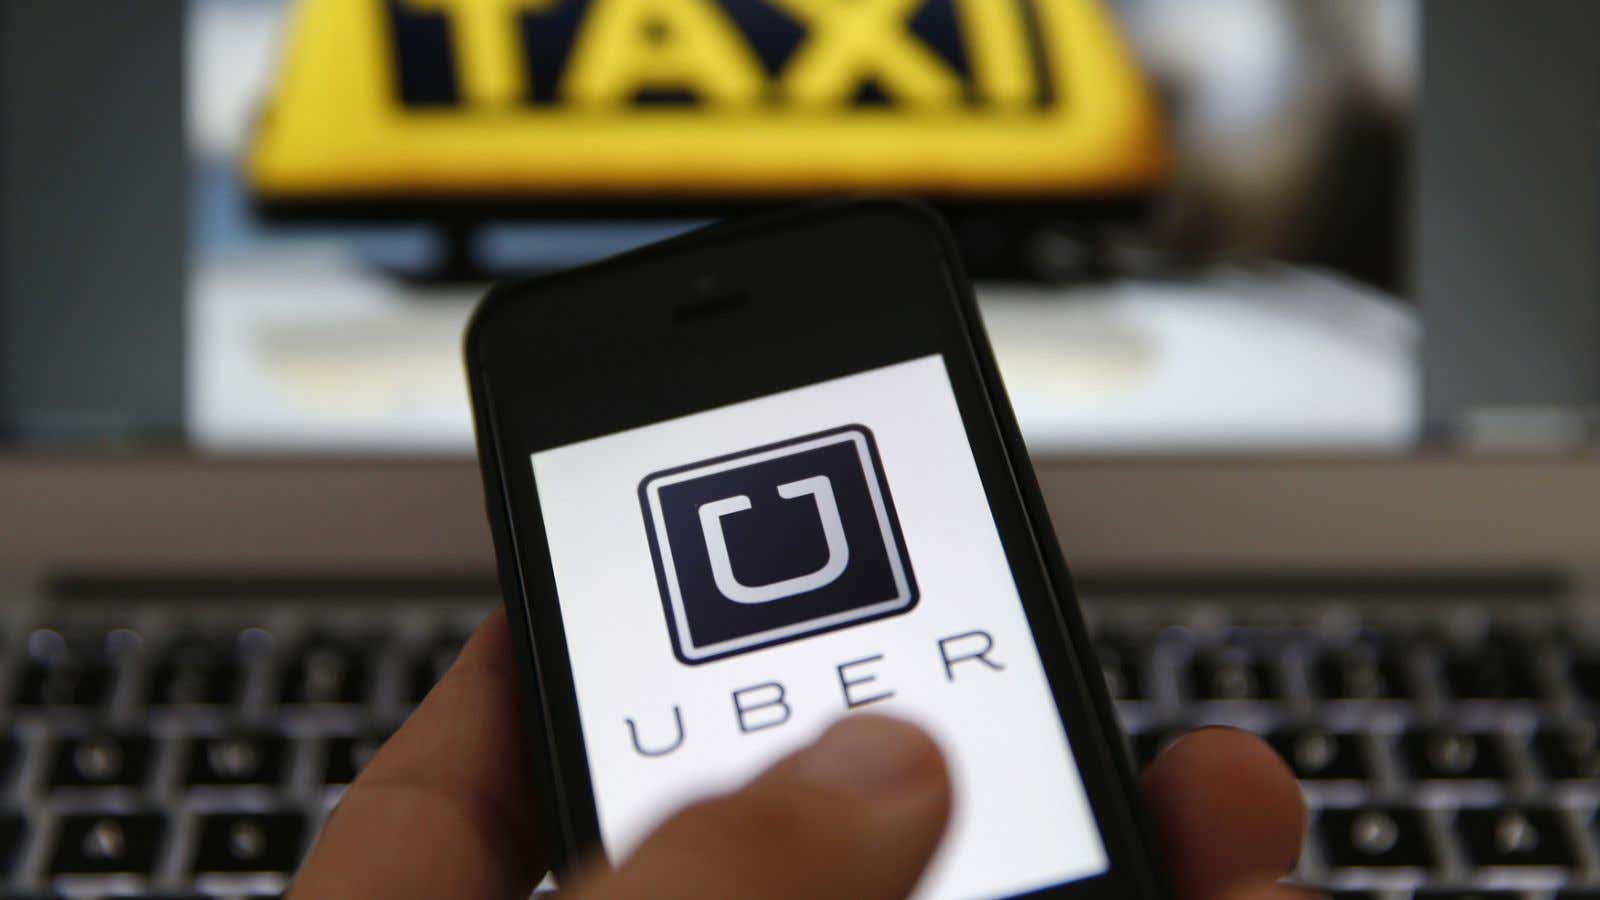 Uber will help Ghana develop its ridesharing policy.